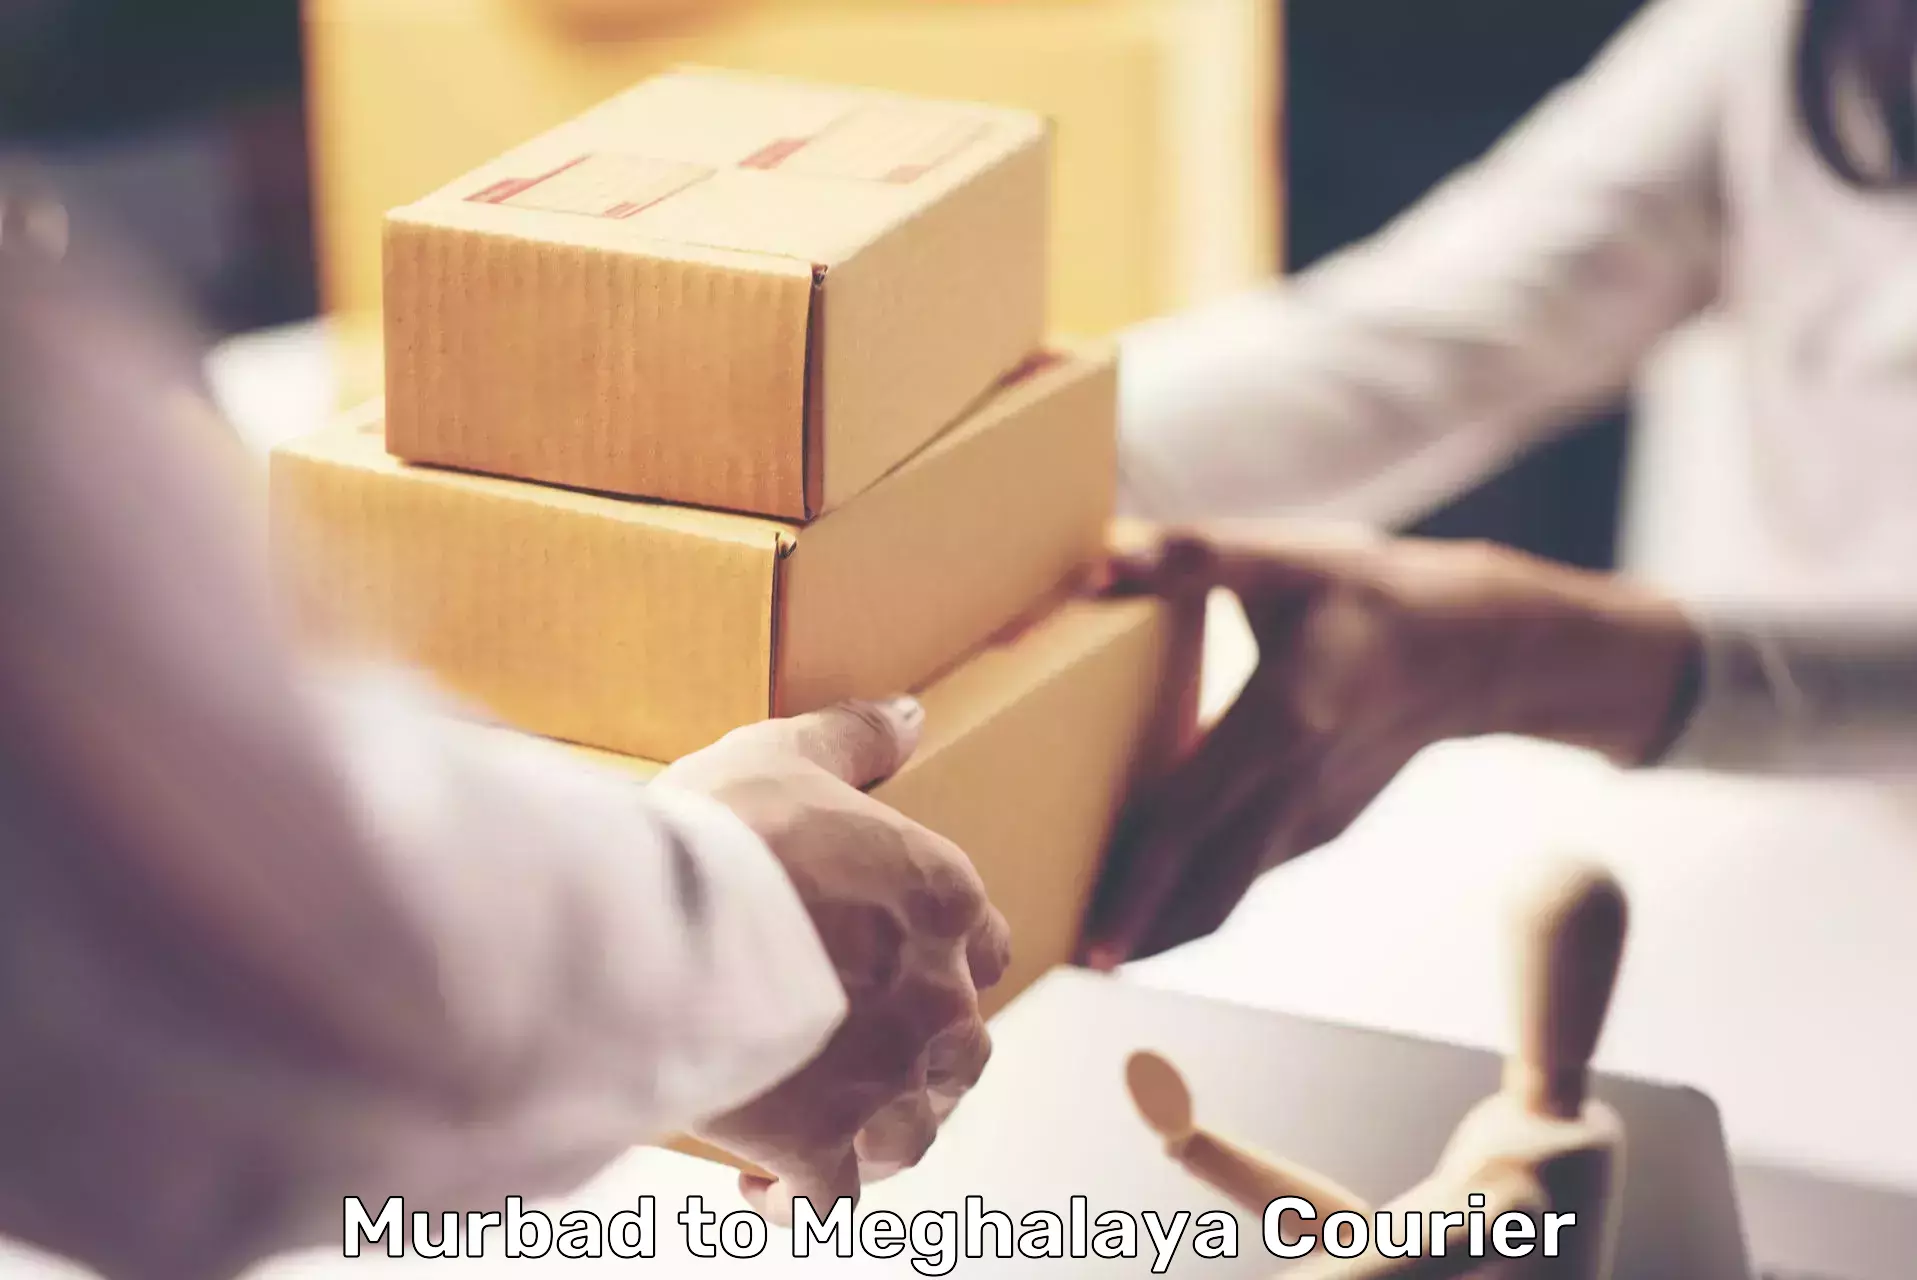 Efficient parcel service Murbad to Meghalaya